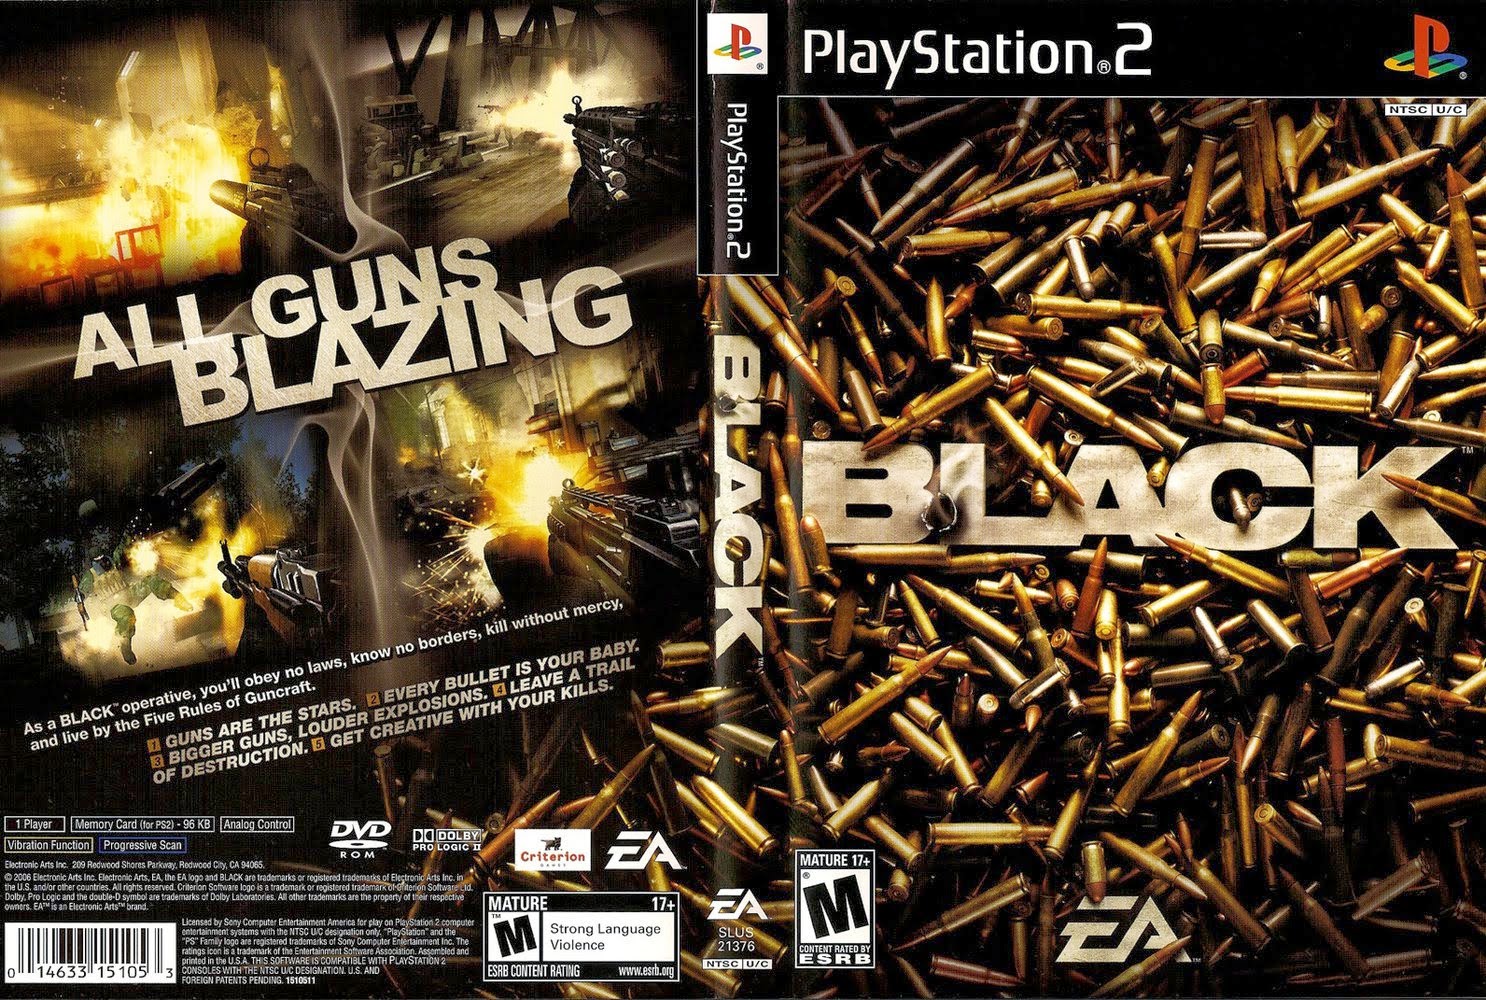 Download game black ps2 for pc windows 10